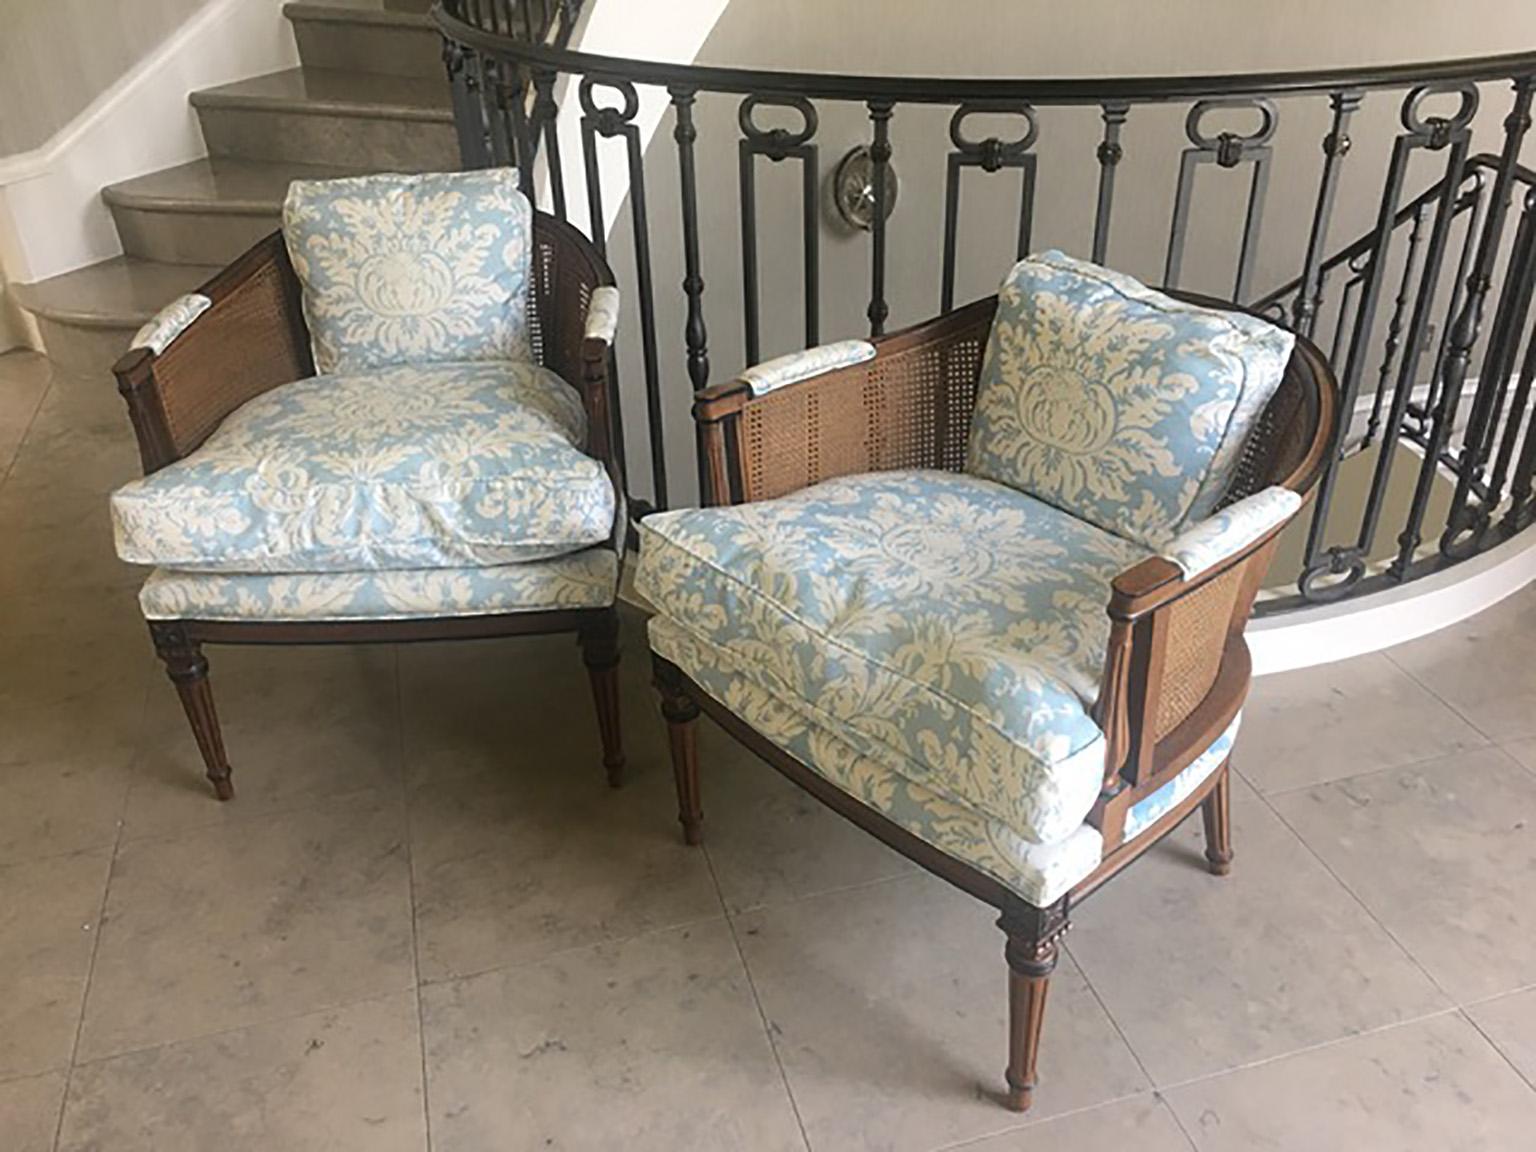 This pair of stunning vintage Hollywood Regency barrel back cane chairs is upholstered in blue silk fabric with down cushions. It is in its original finish with ebony black accents on the walnut wood frame. The cane is in great shape. The back